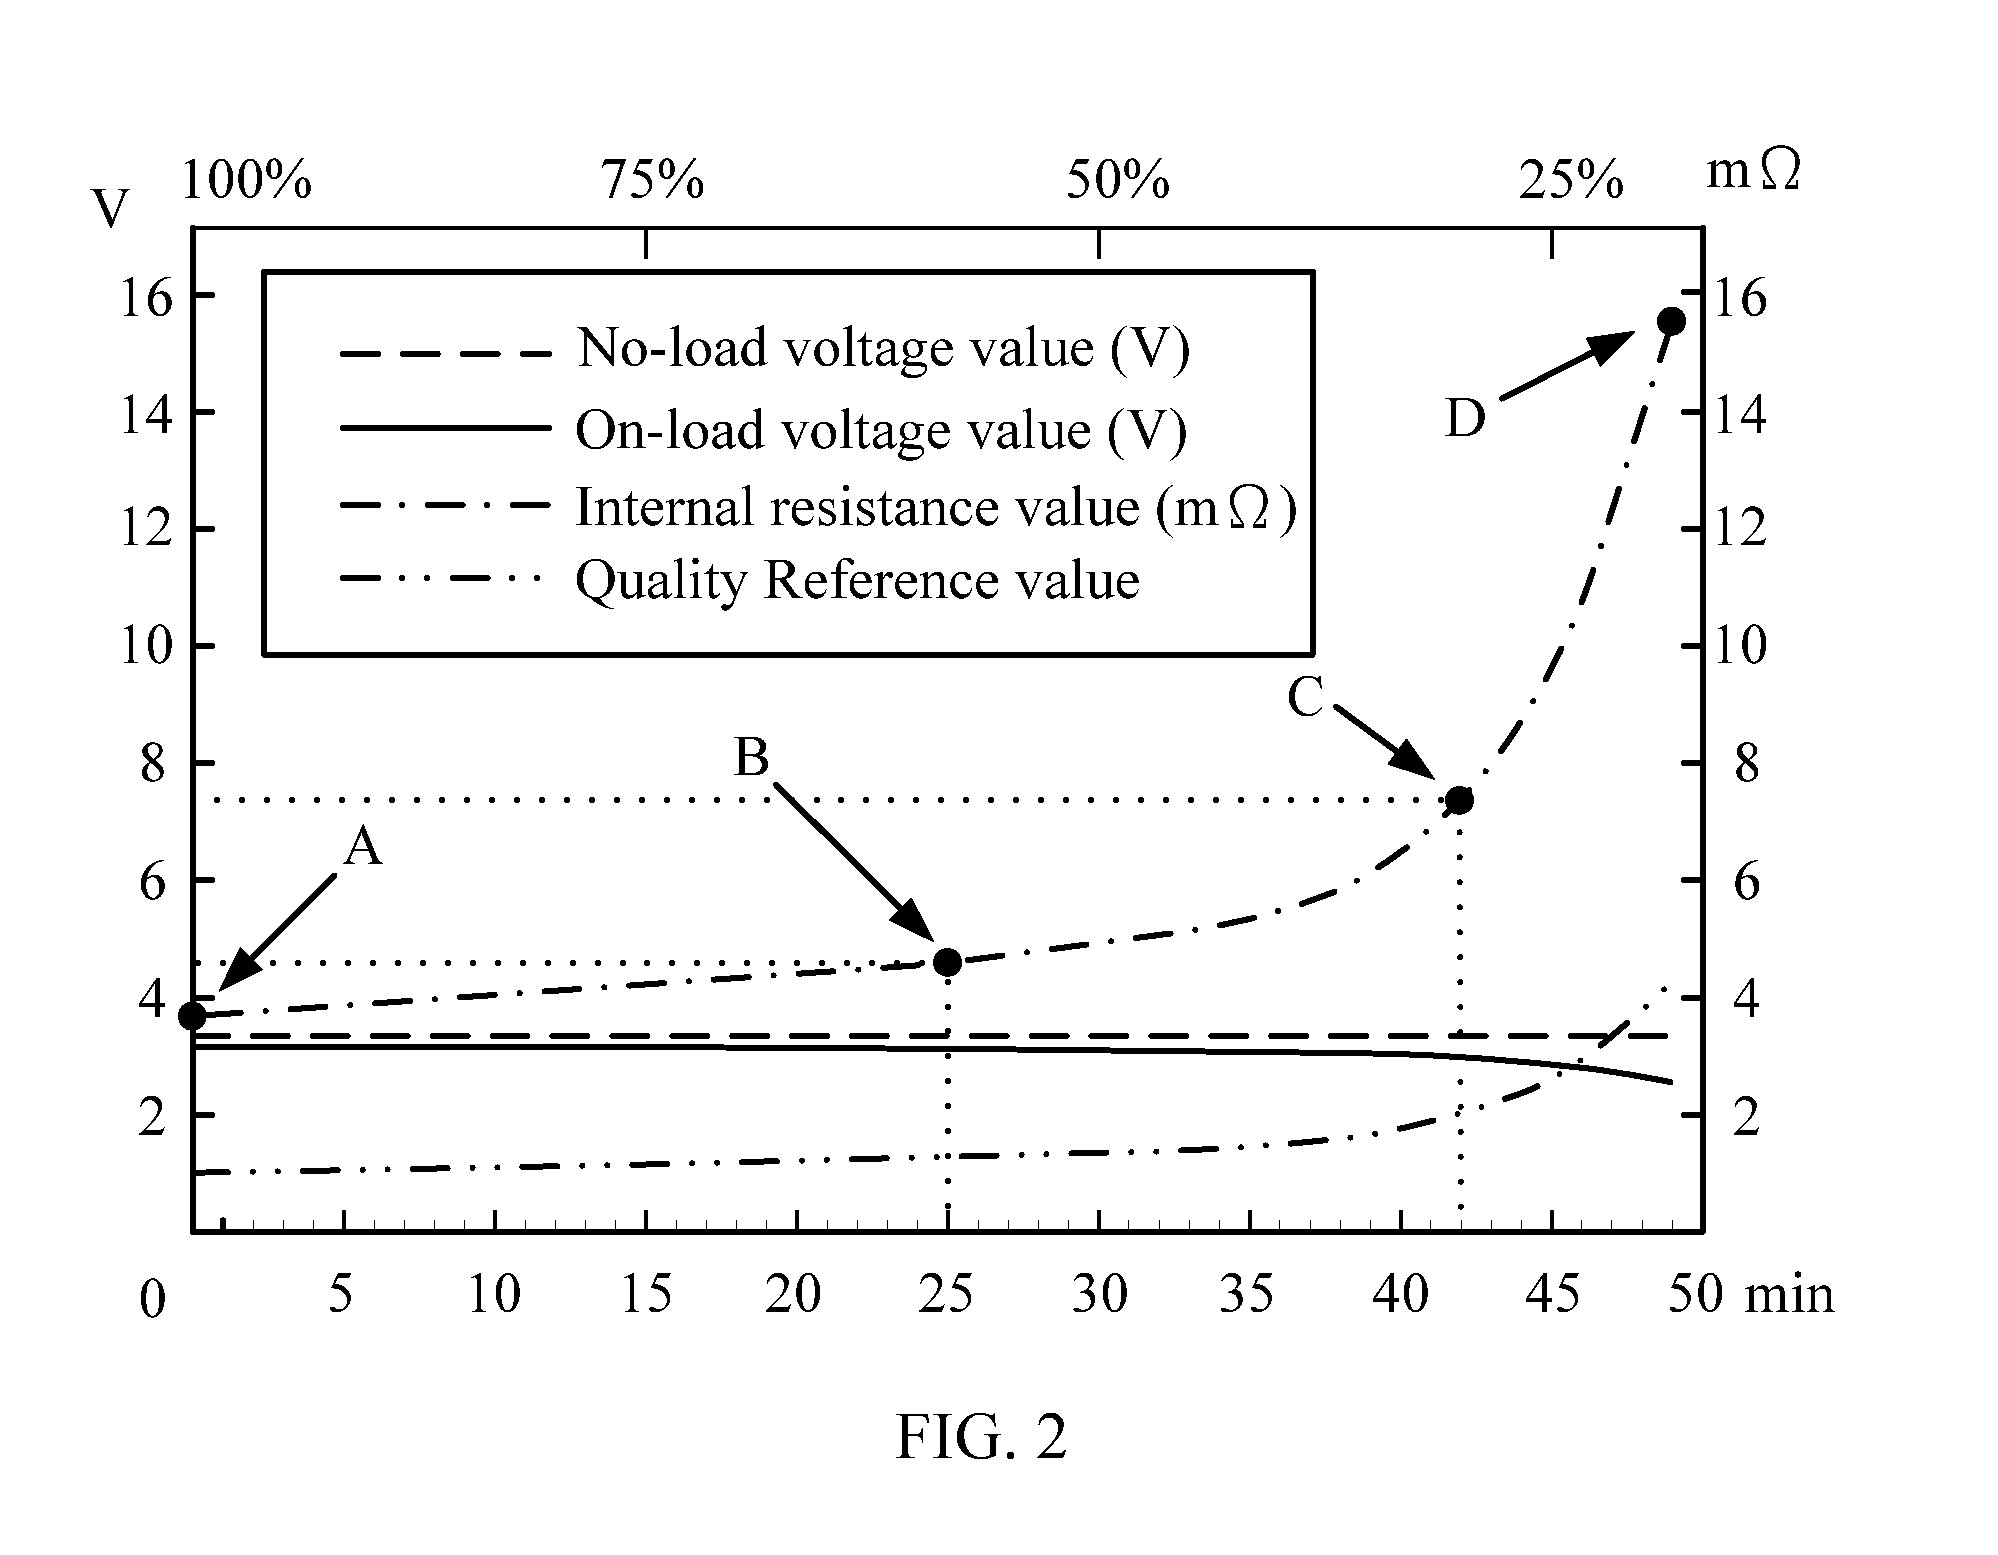 Battery module state detection method